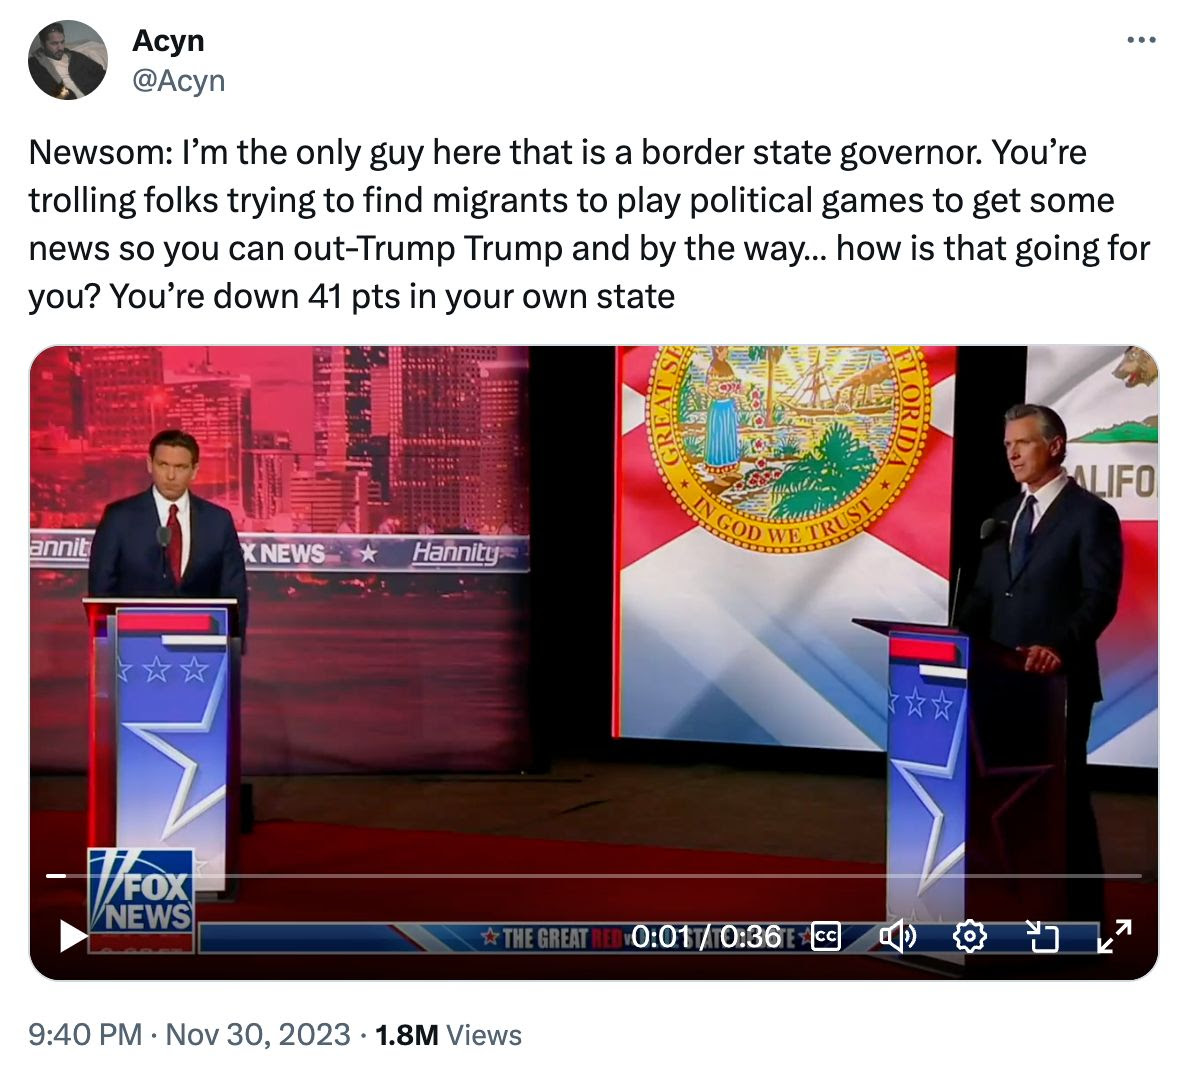 'Newsom: I’m the only guy here that is a border state governor. You’re trolling folks trying to find migrants to play political games to get some news so you can out-Trump Trump and by the way… how is that going for you? You’re down 41 pts in your own state'